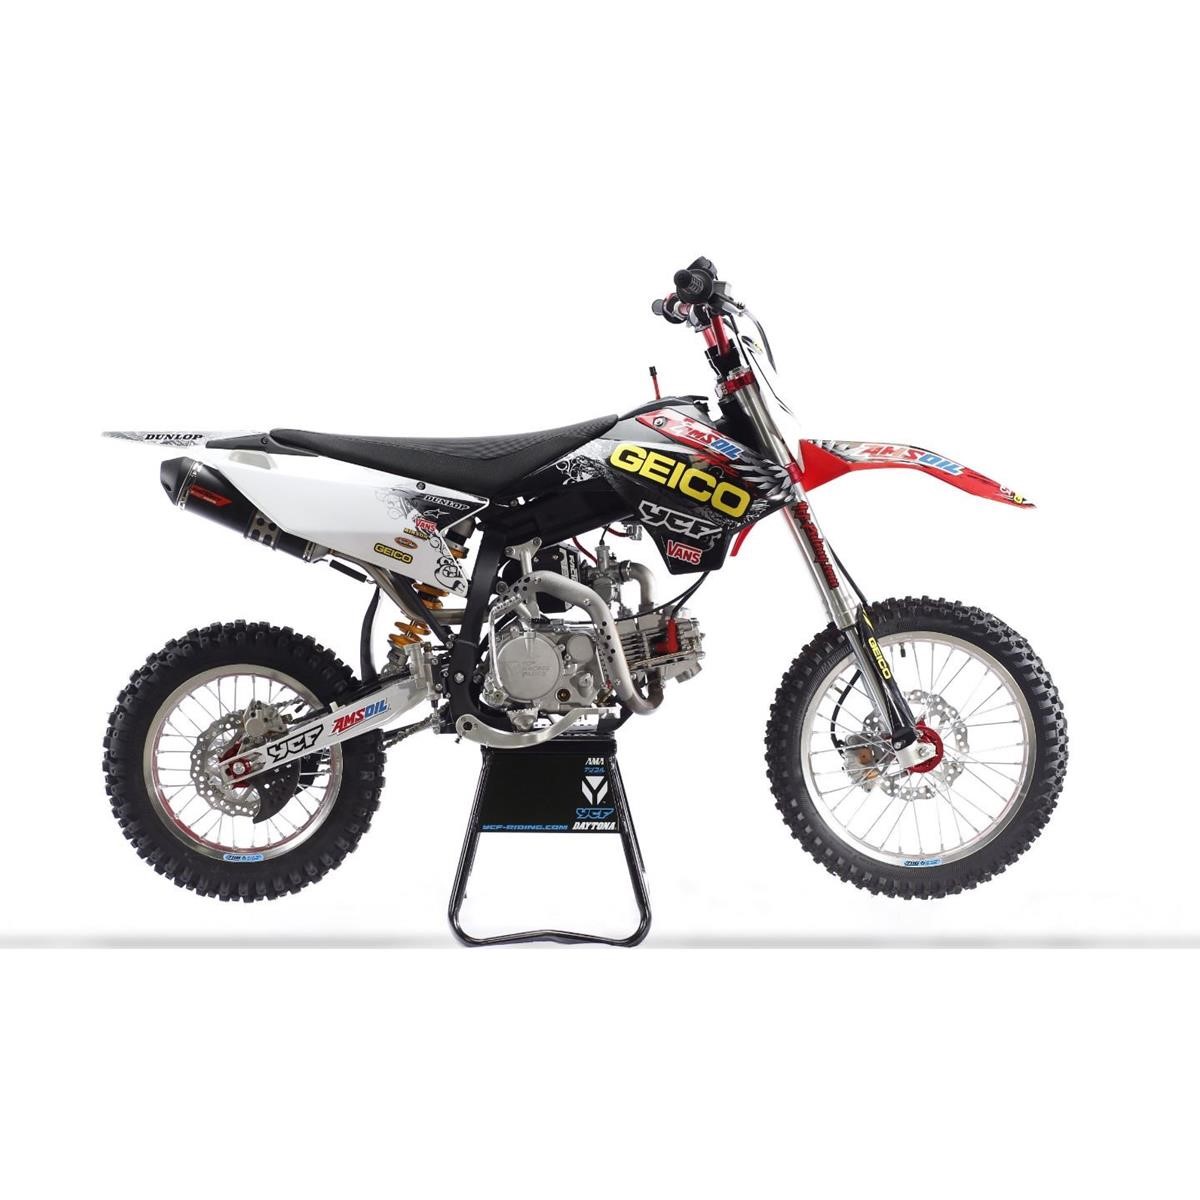 YCF Pitbike Bigy Factory Limited Geico 150 MX, Modell 2017